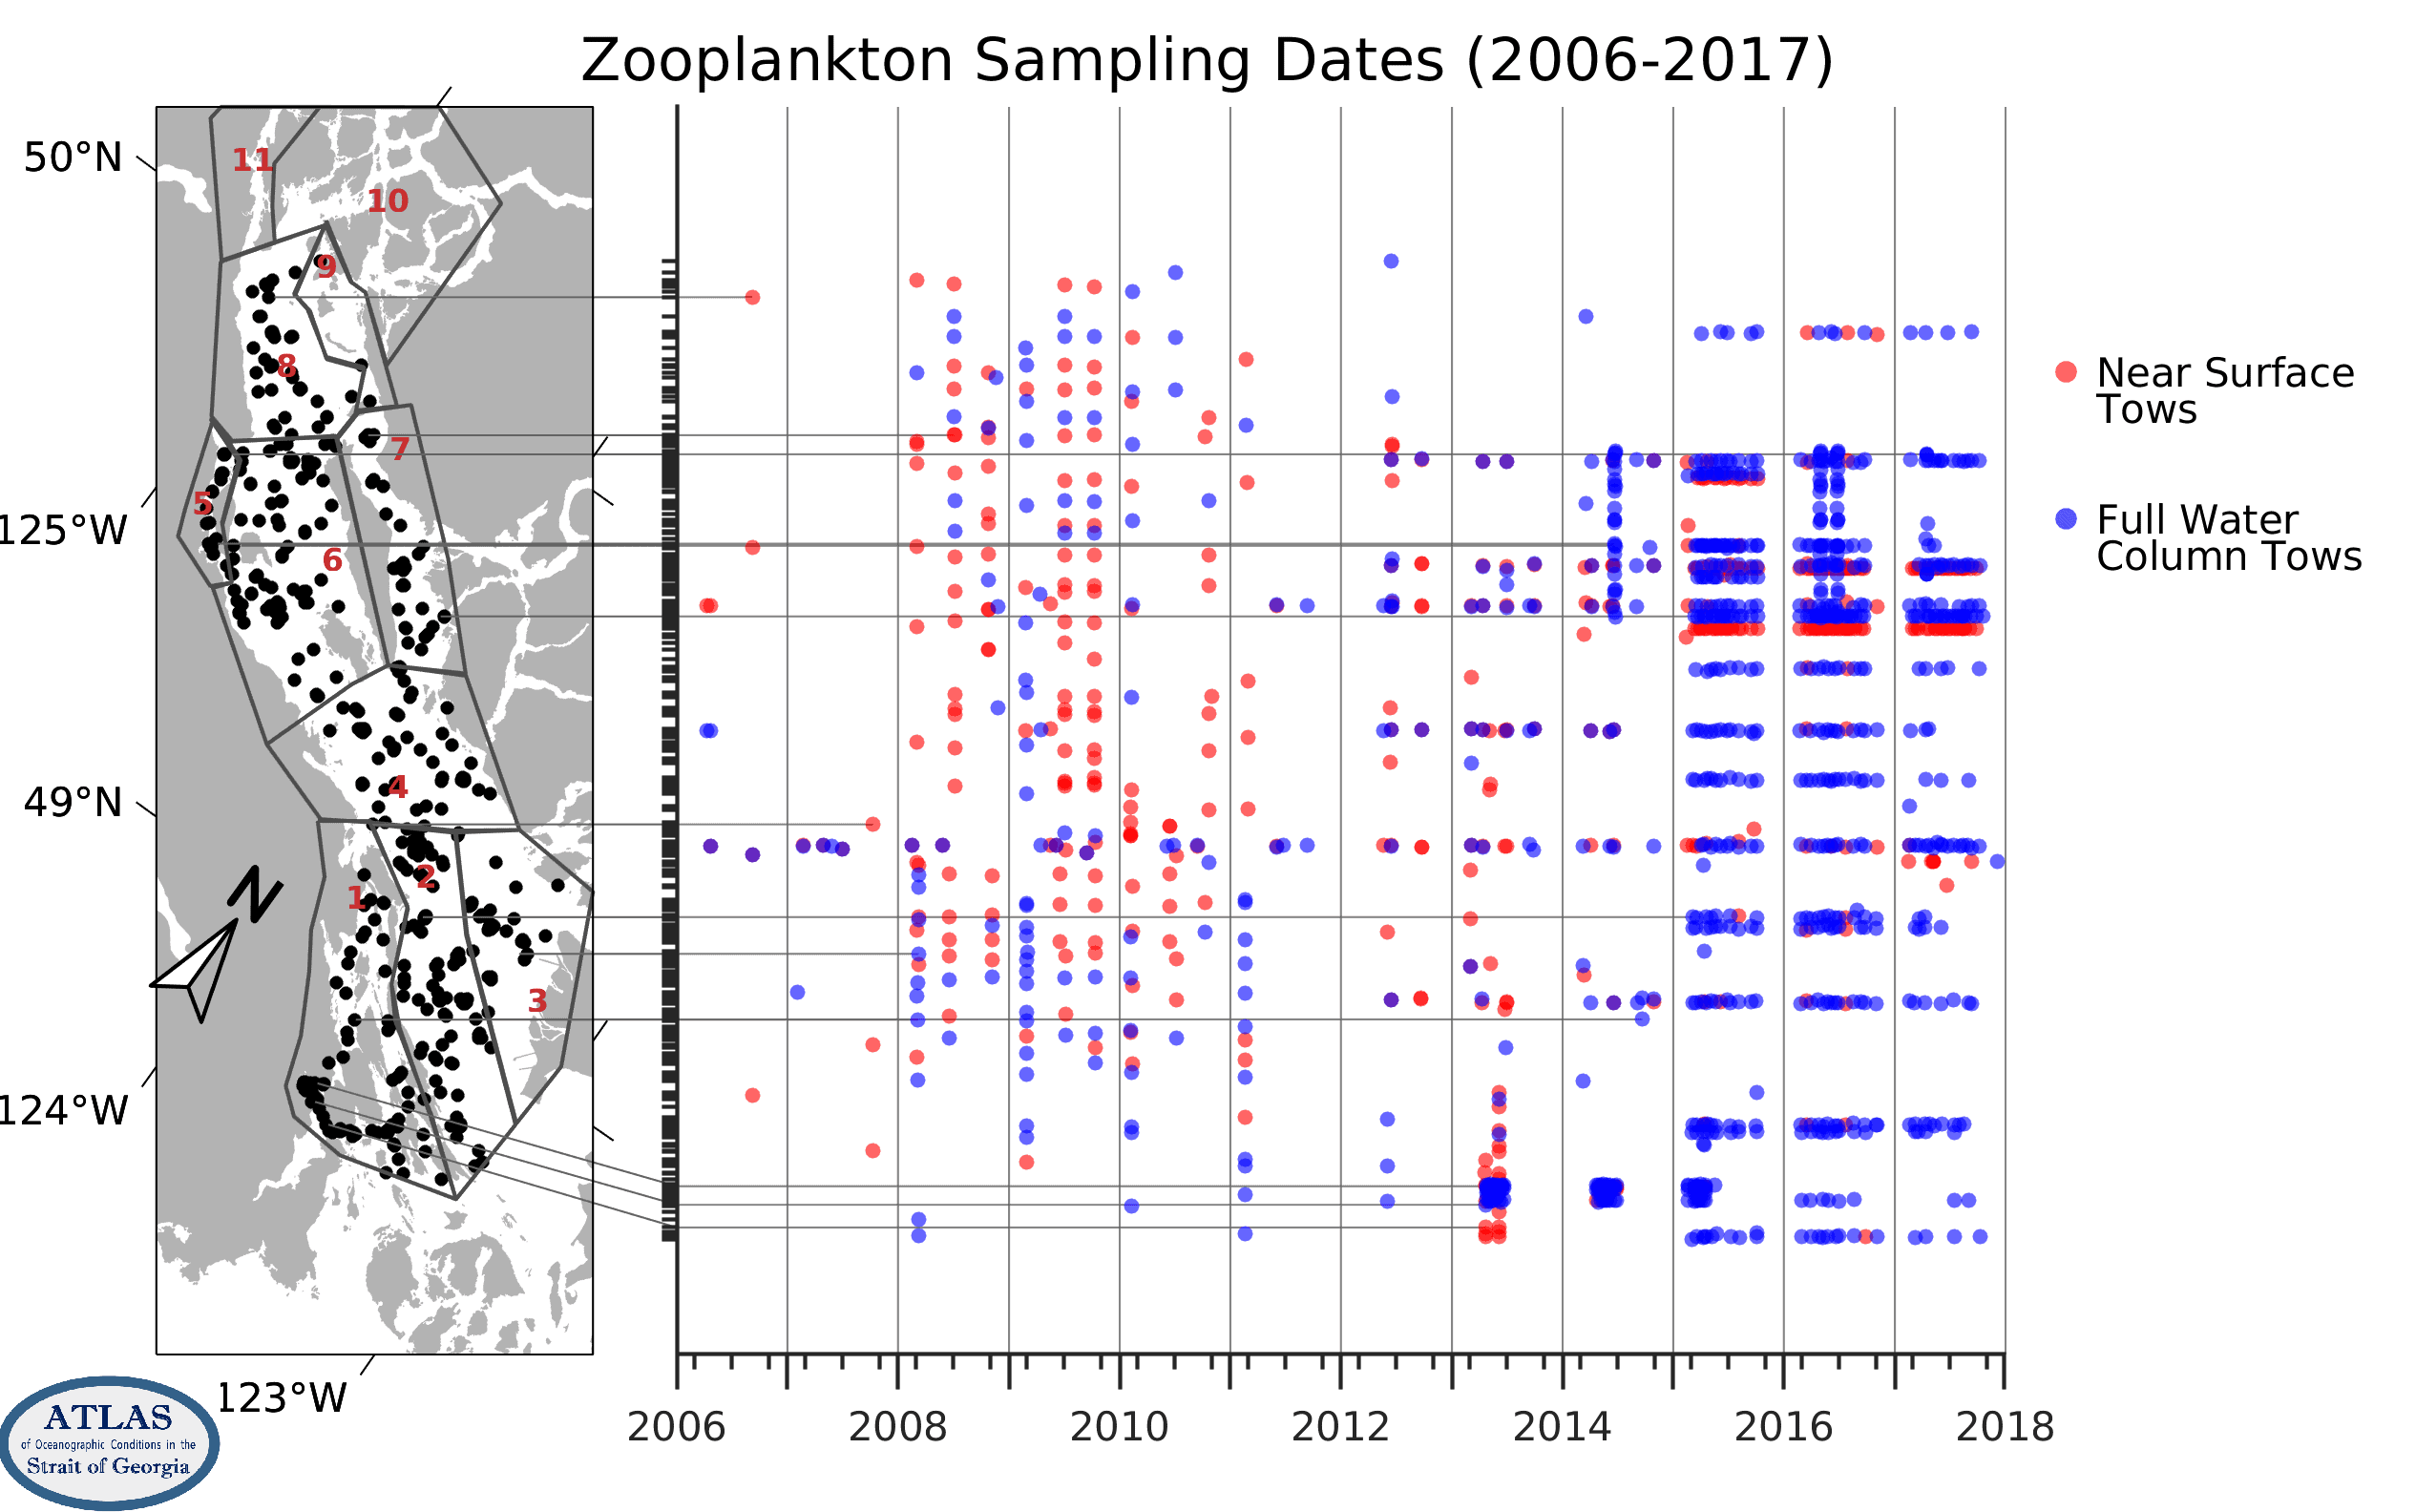 Sampling frequency for zooplankton tows plotted horizontally through time at a vertical location that coincides with its location in the map at left.